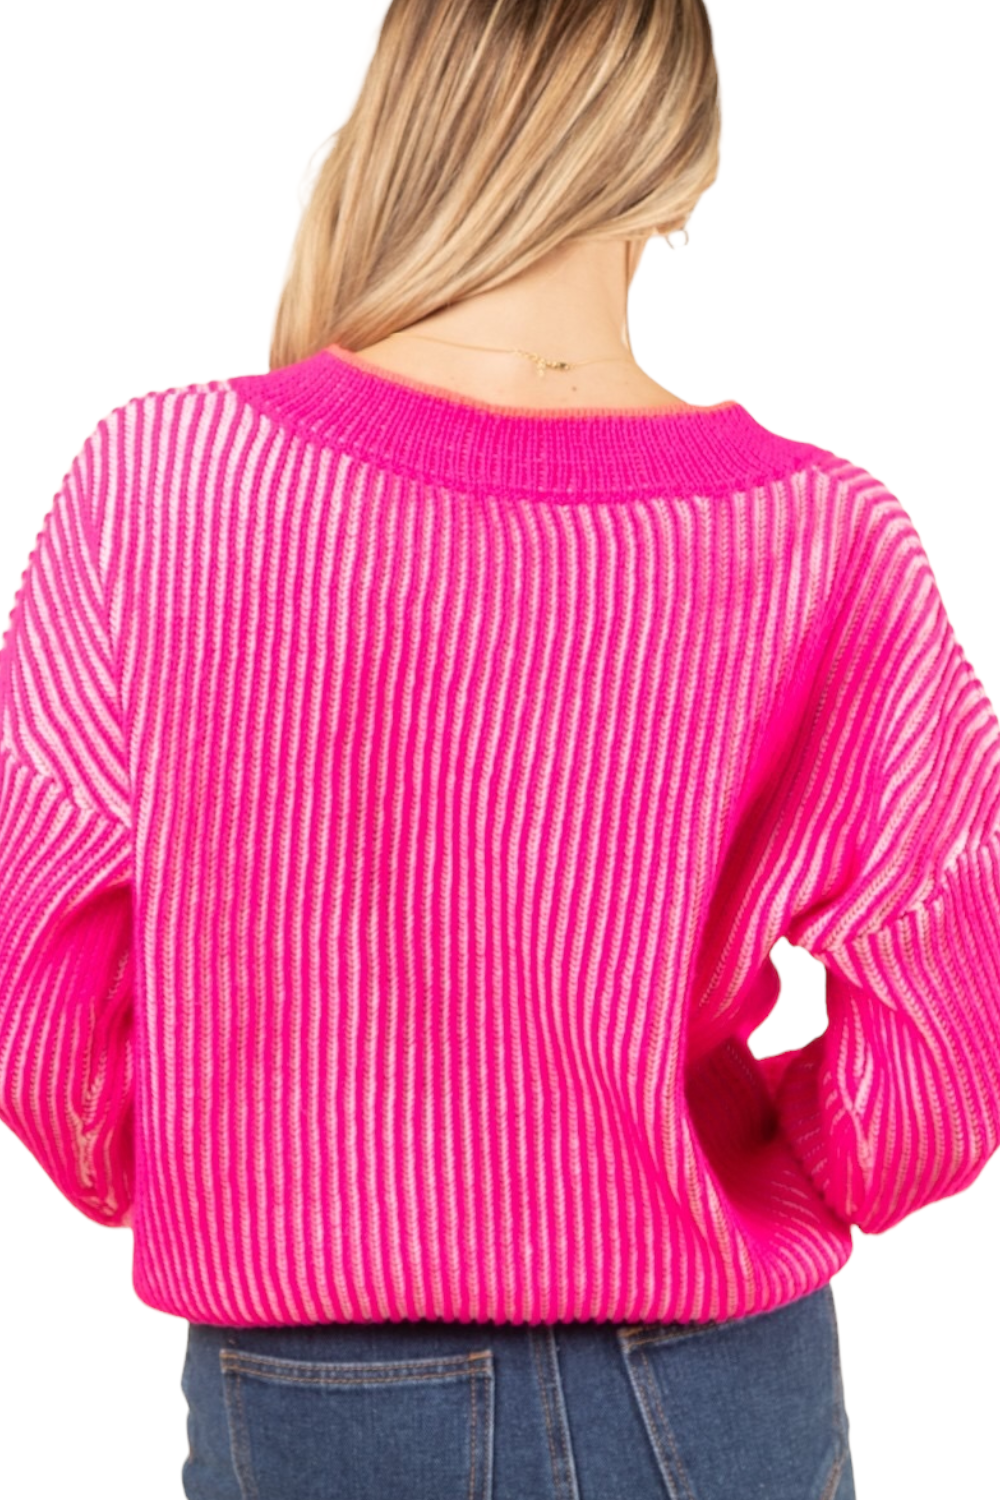 Moment In Time Sweater-Hot Pink